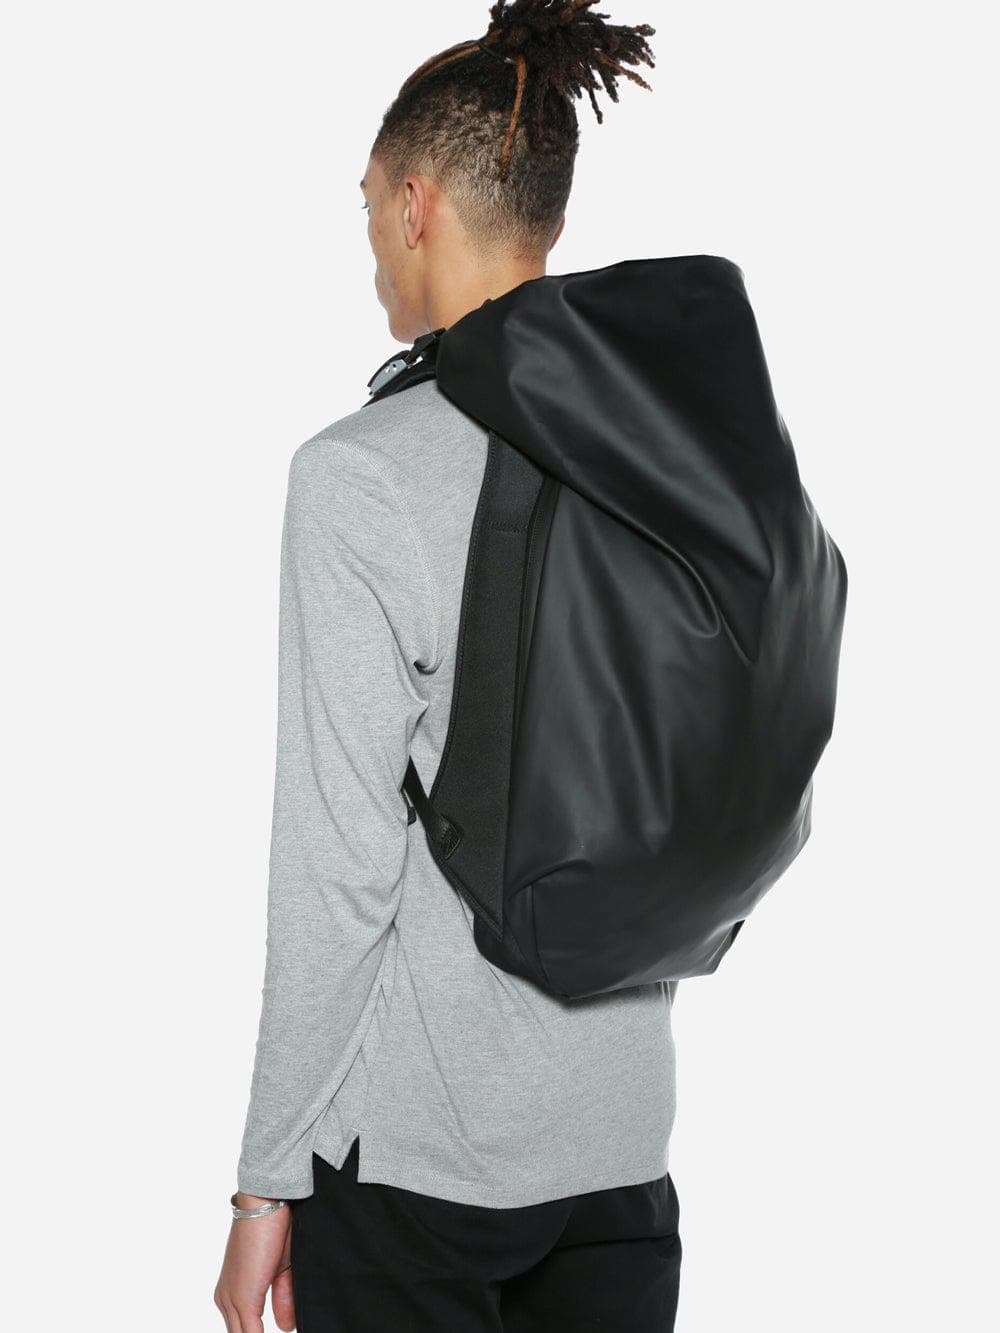 Best laptop backpack minimalist for work and travel